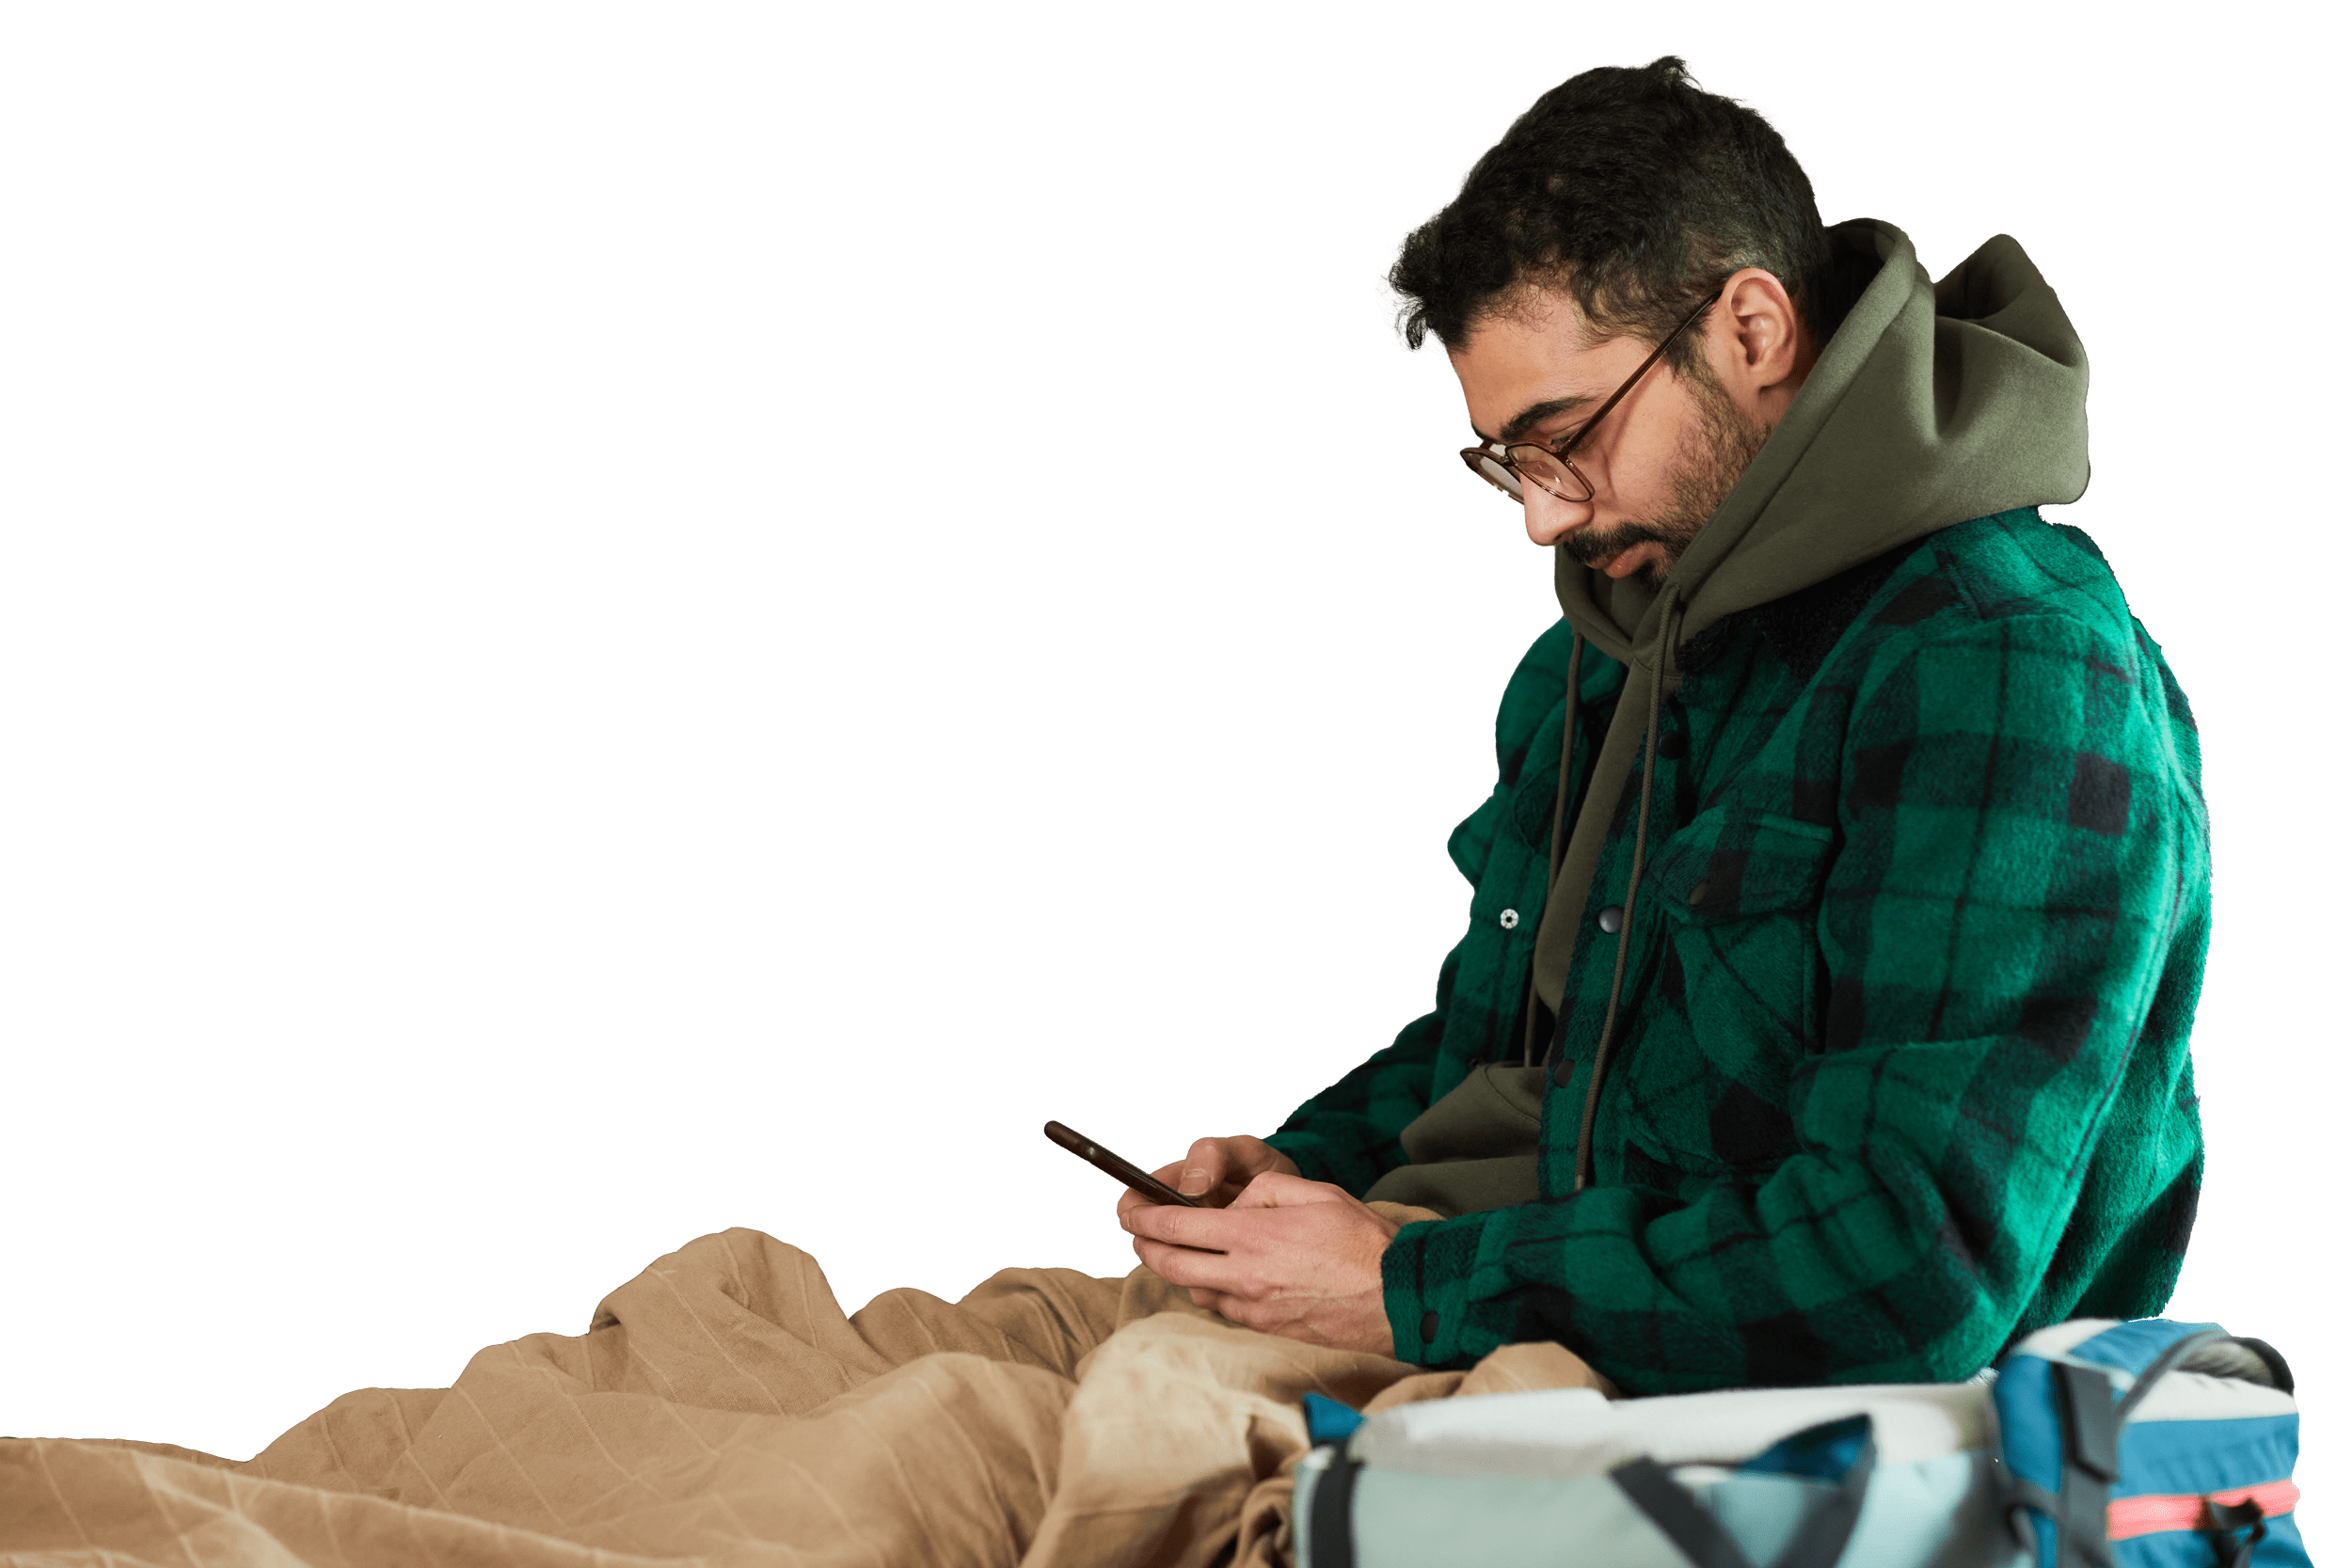 Homeless person using a cellphone in a shelter.